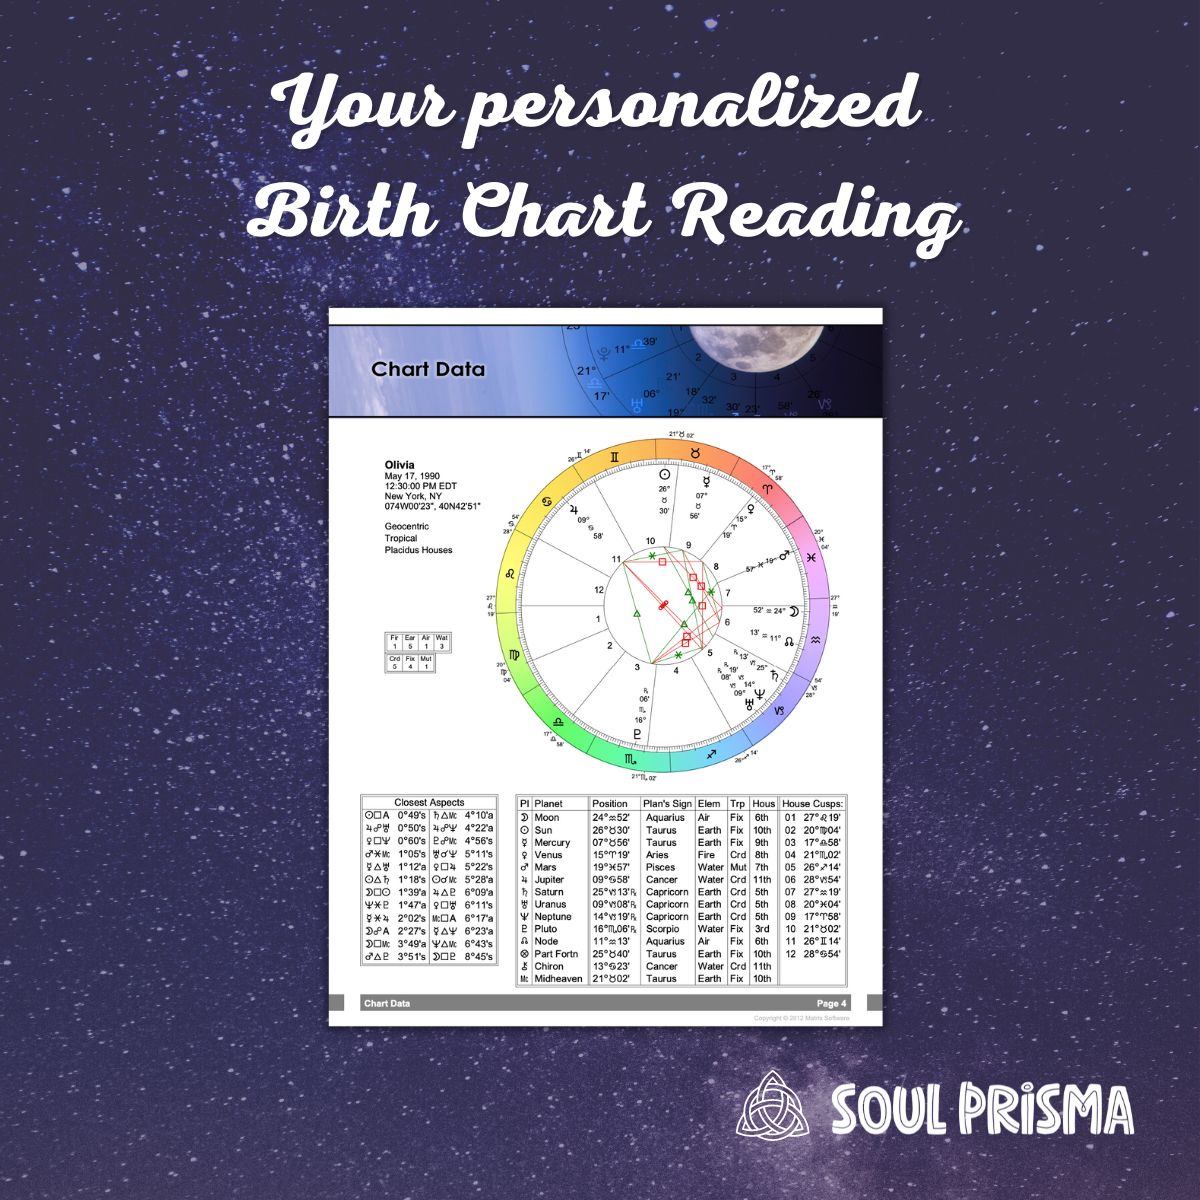 Your Personalized Birth Chart Reading